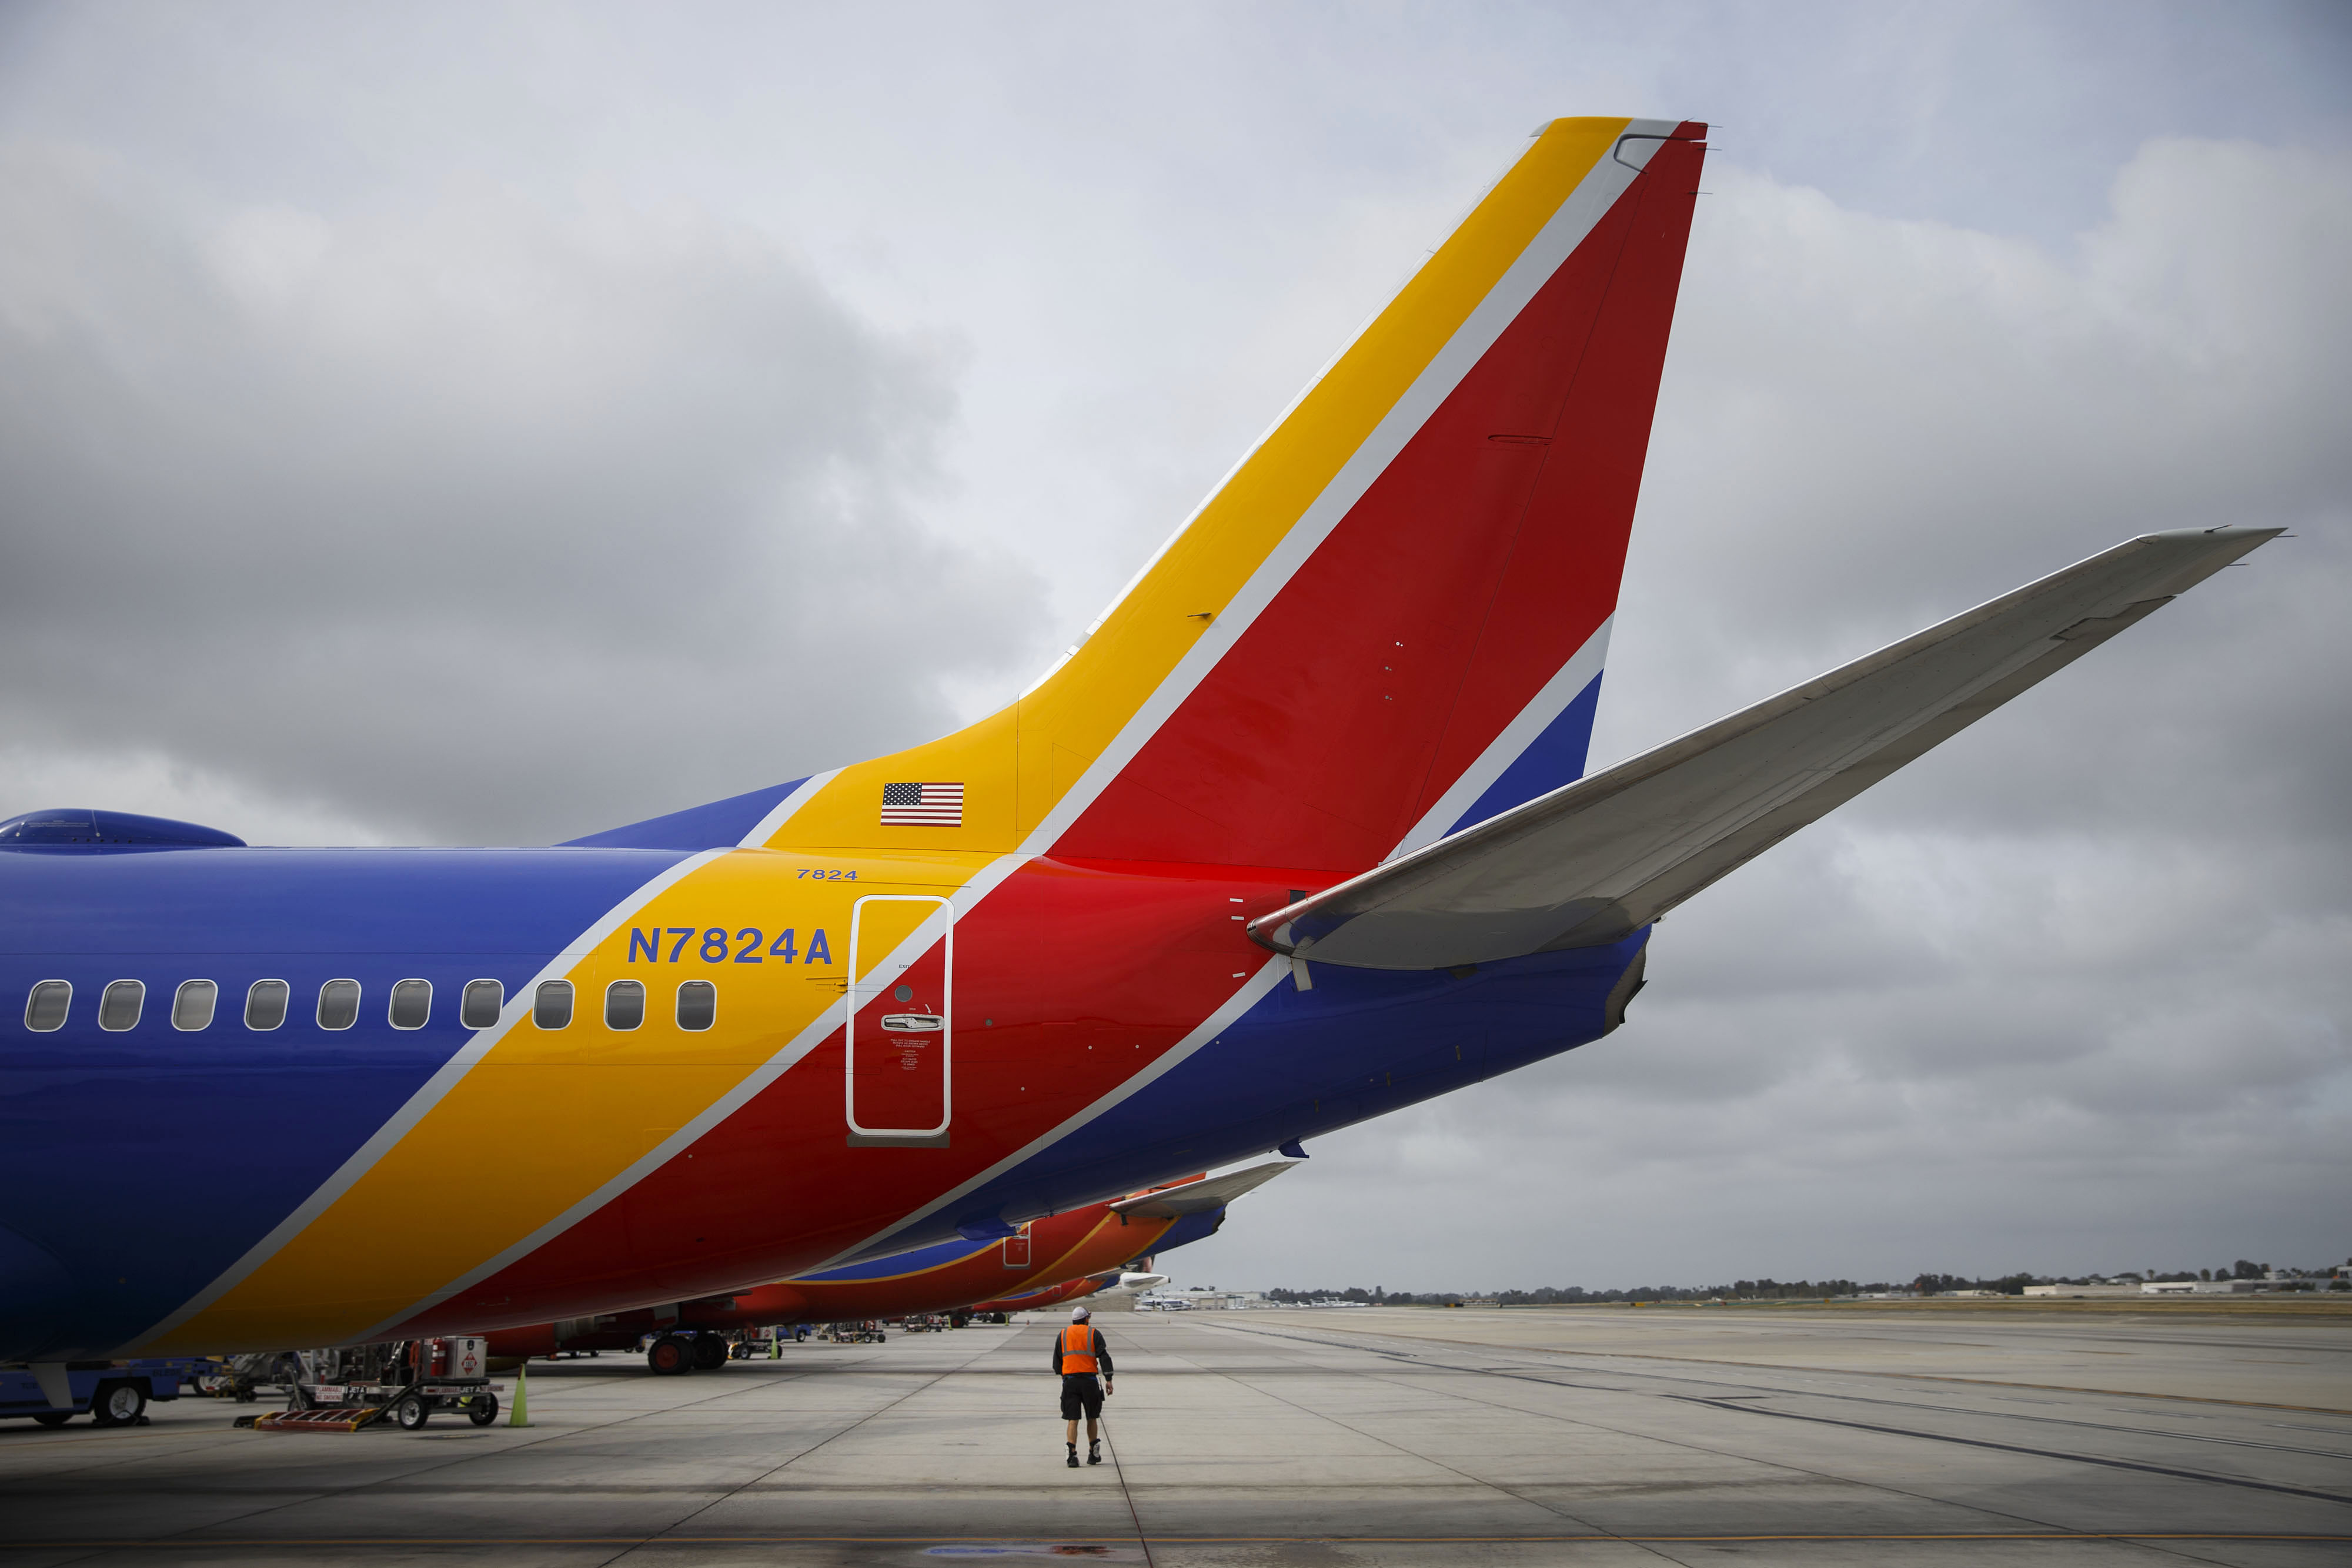 A Southwest Airlines Co. employee walks underneath the tail of a Boeing Co. 737 aircraft on the tarmac at John Wayne Airport (SNA) in Santa Ana, California, on April 14, 2016. (Patrick T. Fallon—Bloomberg/Getty Images)